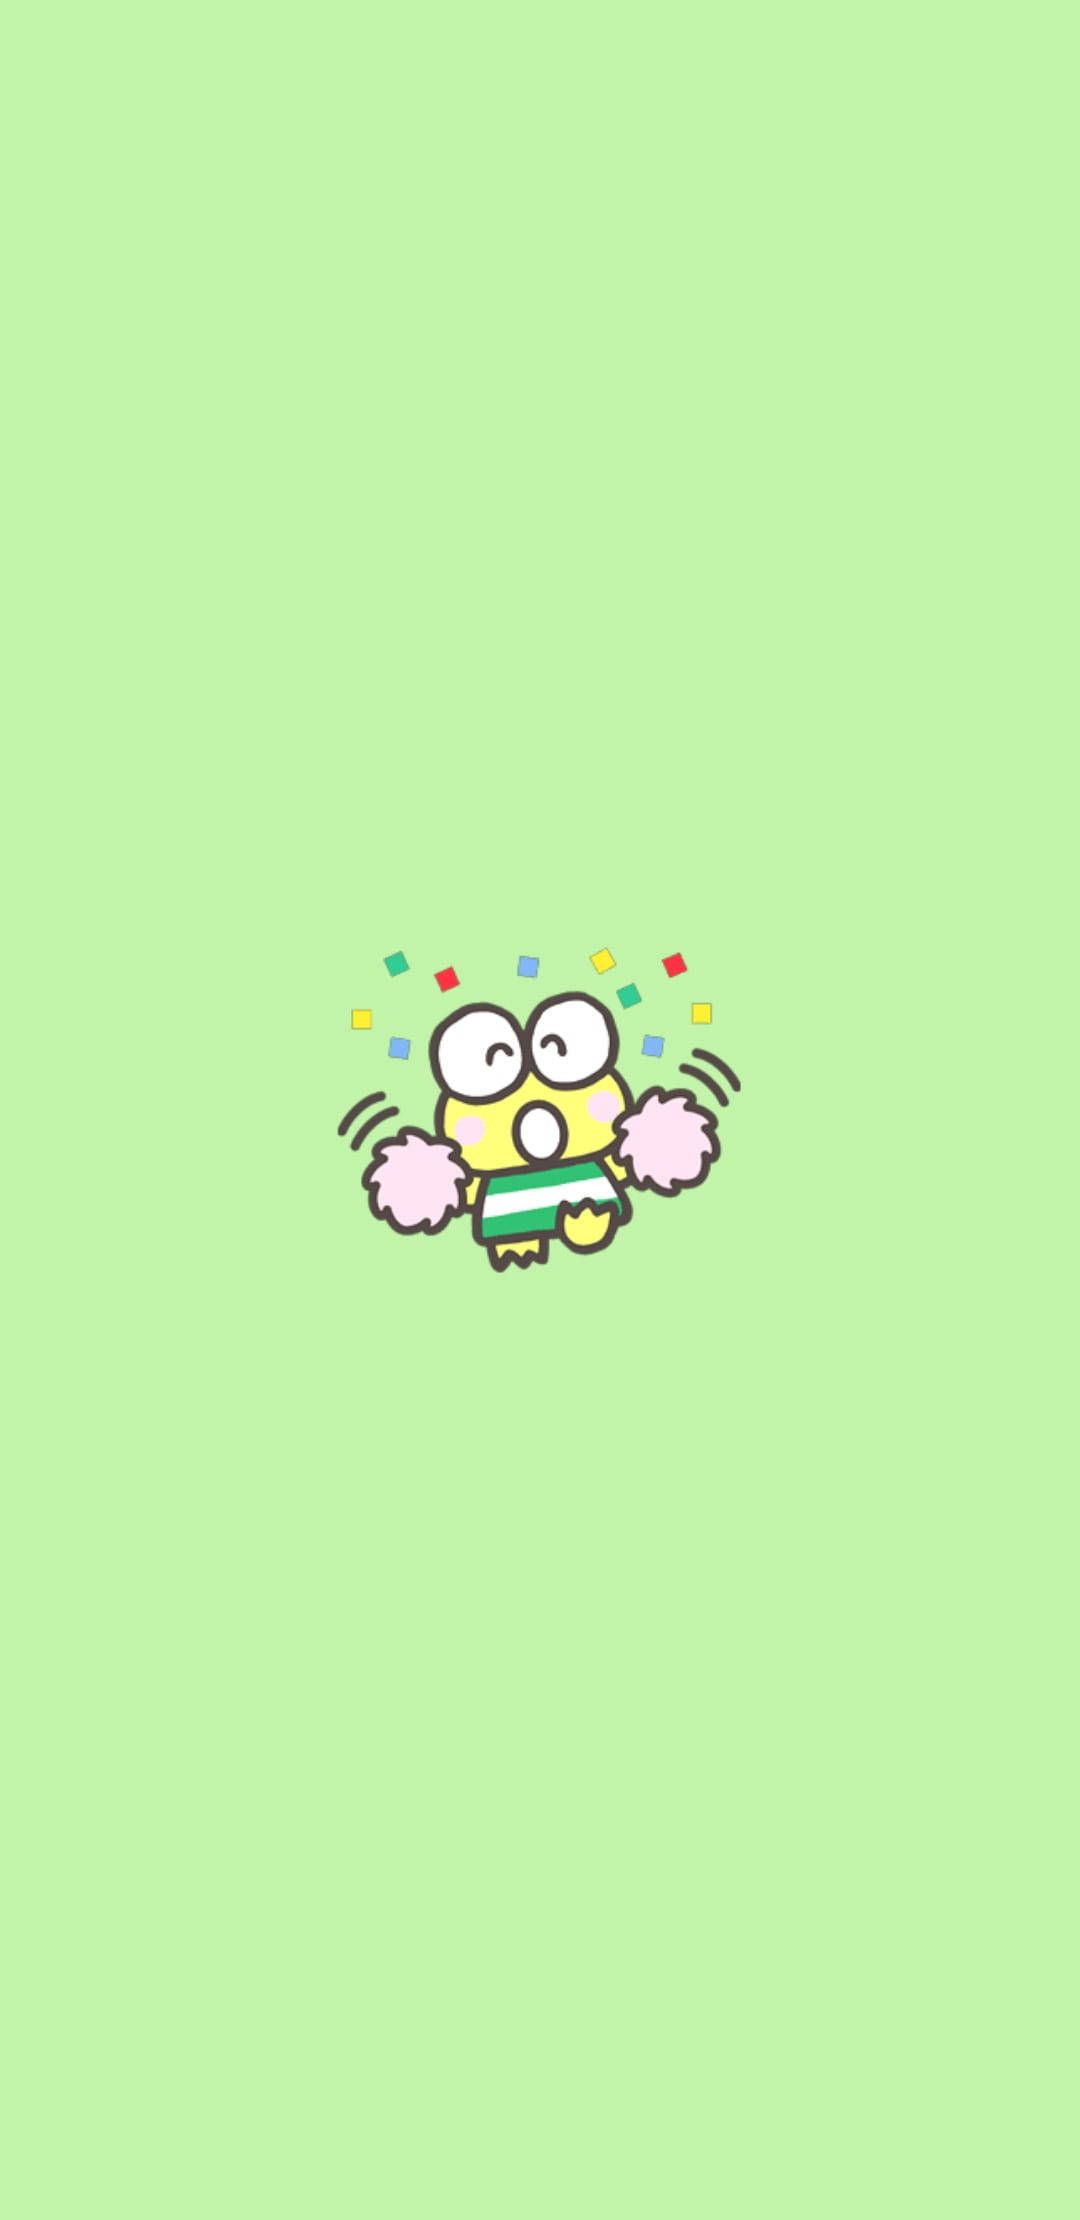 A green phone wallpaper with a cartoon character of a frog wearing a striped shirt and pink shoes. - Sanrio